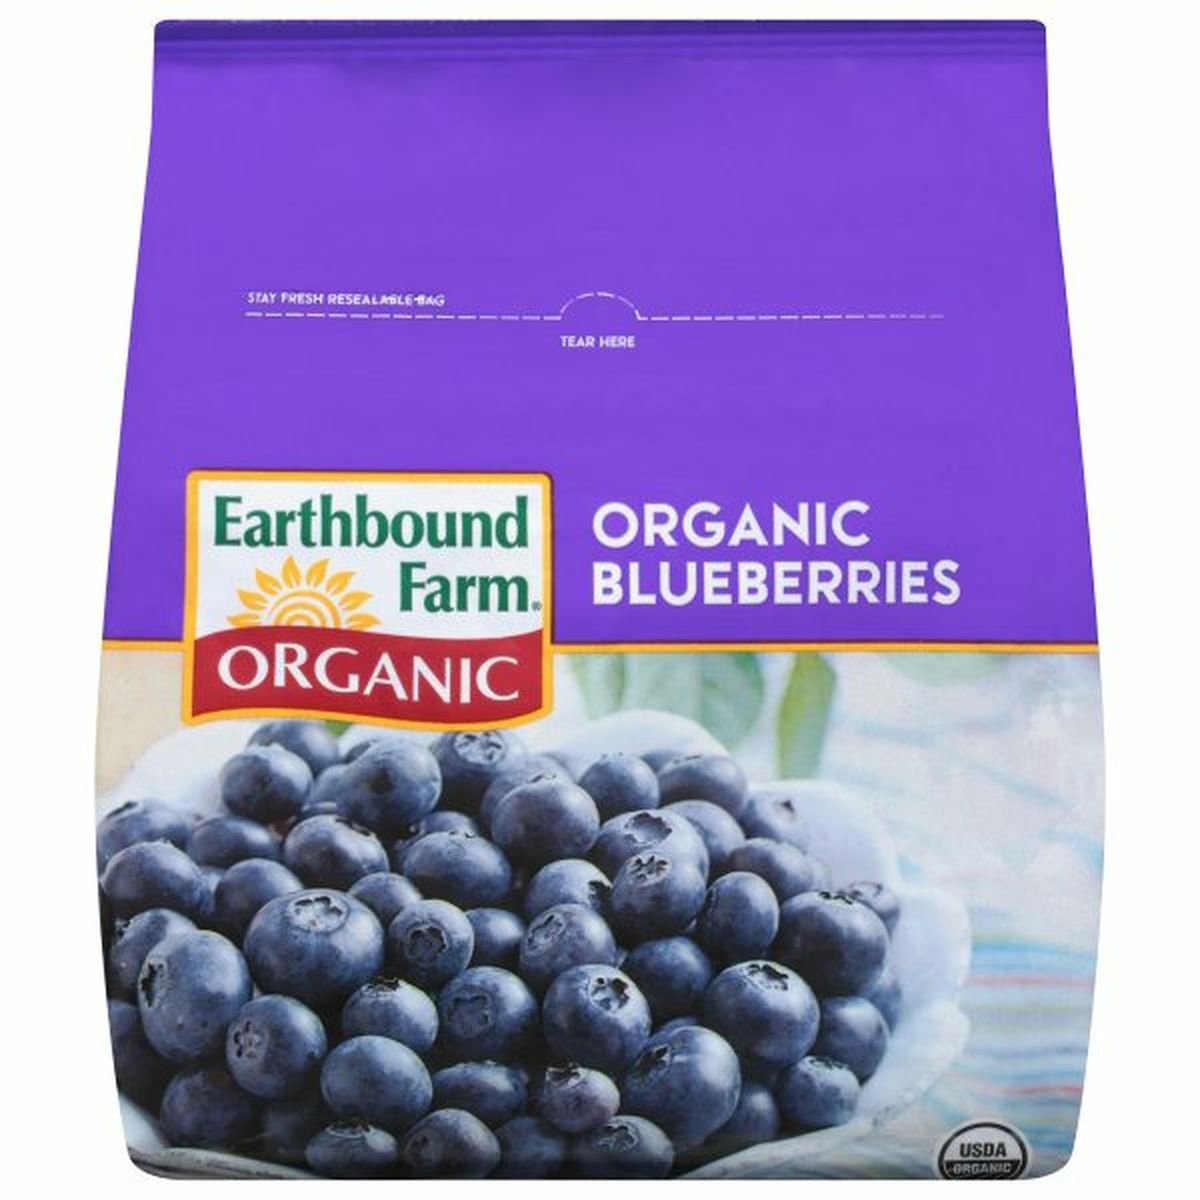 Calories in Earthbound Farms Blueberries, Organic